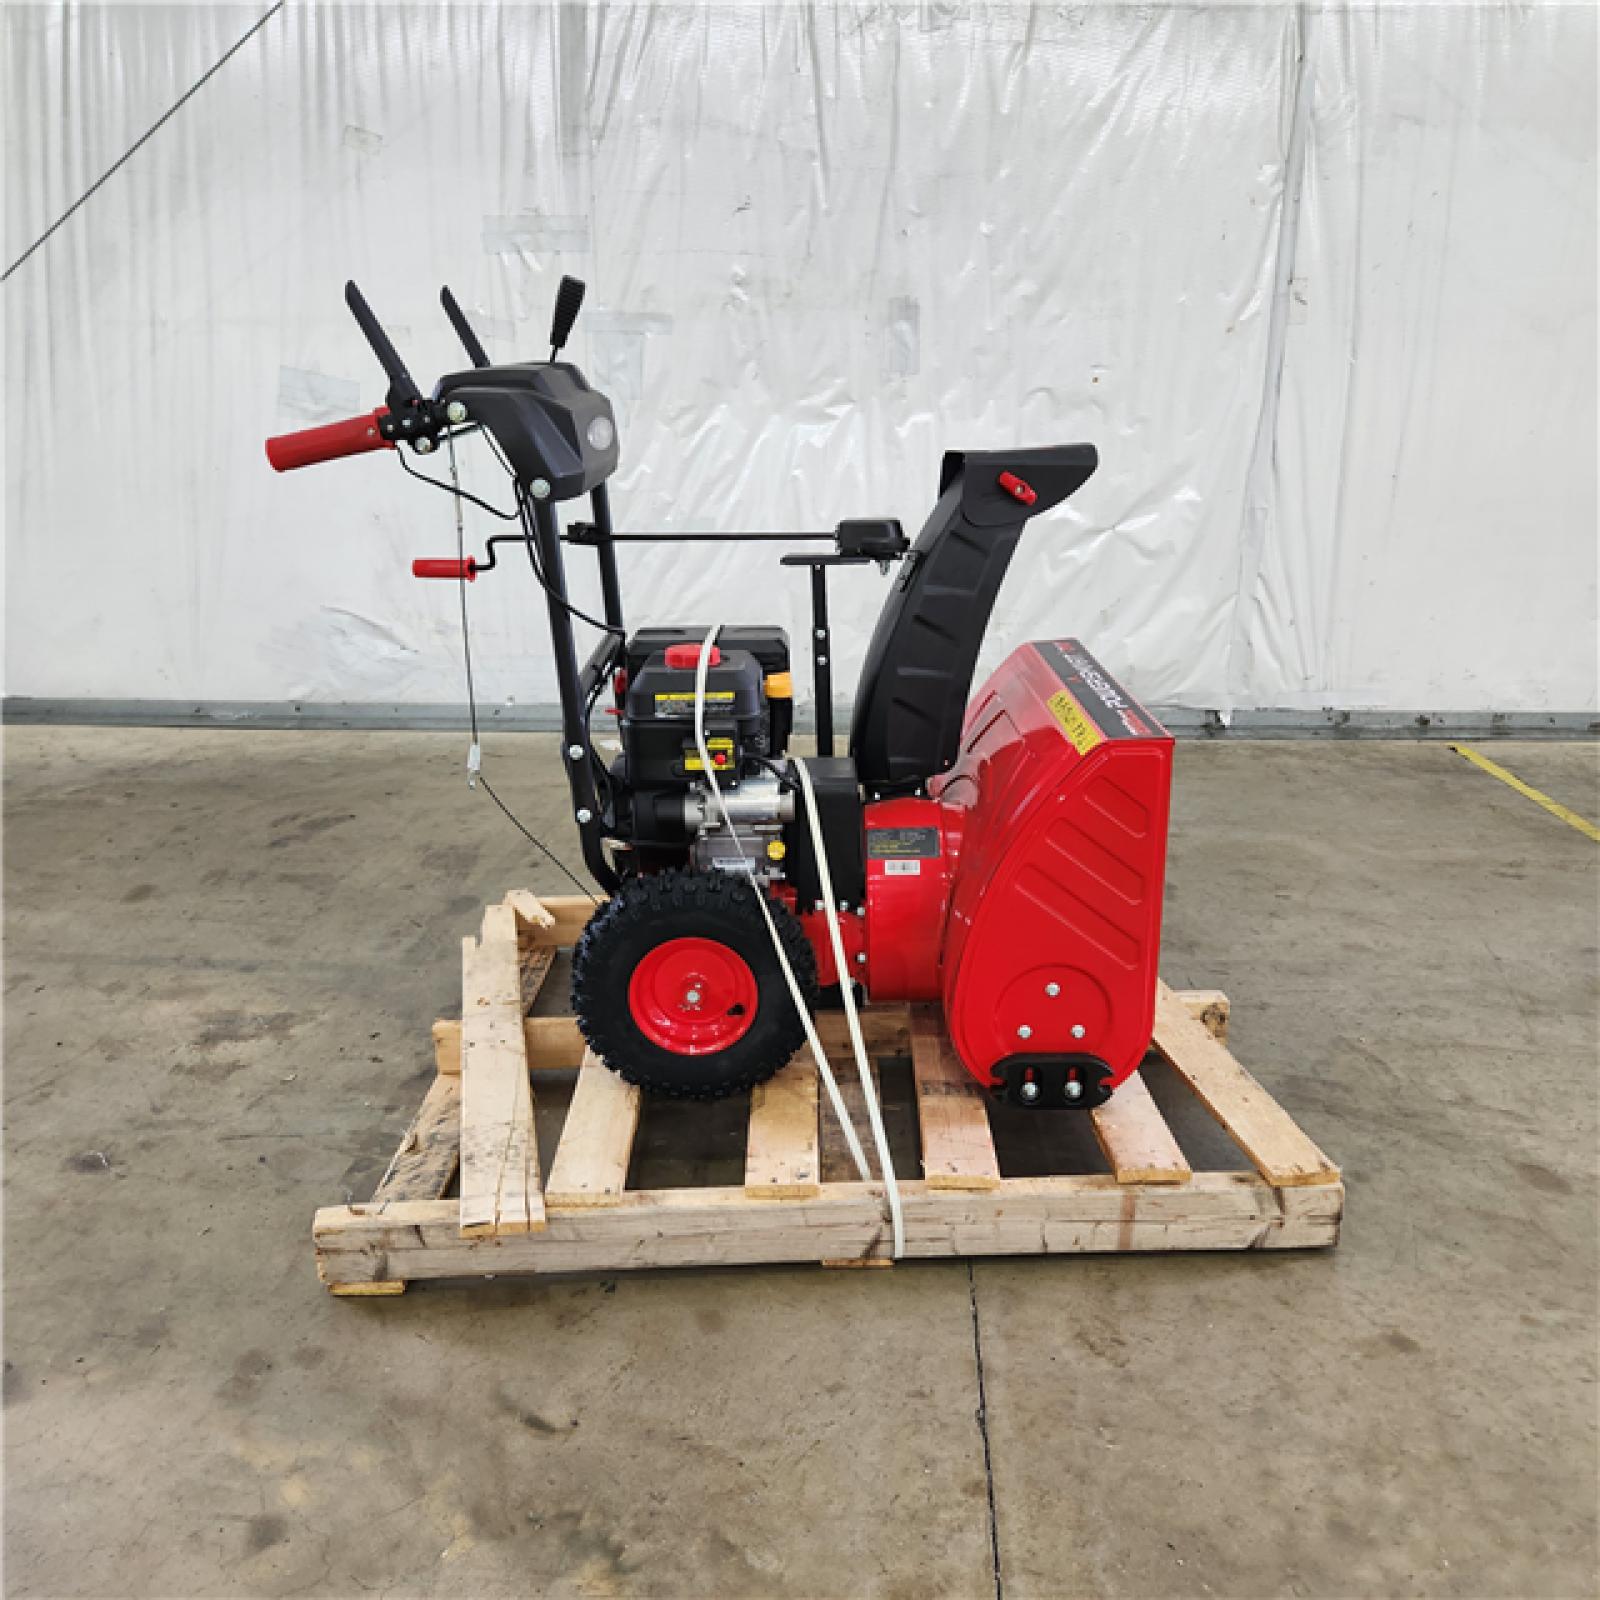 Houston Location - AS-IS Power Smart 24'' in  212cc Snowblower